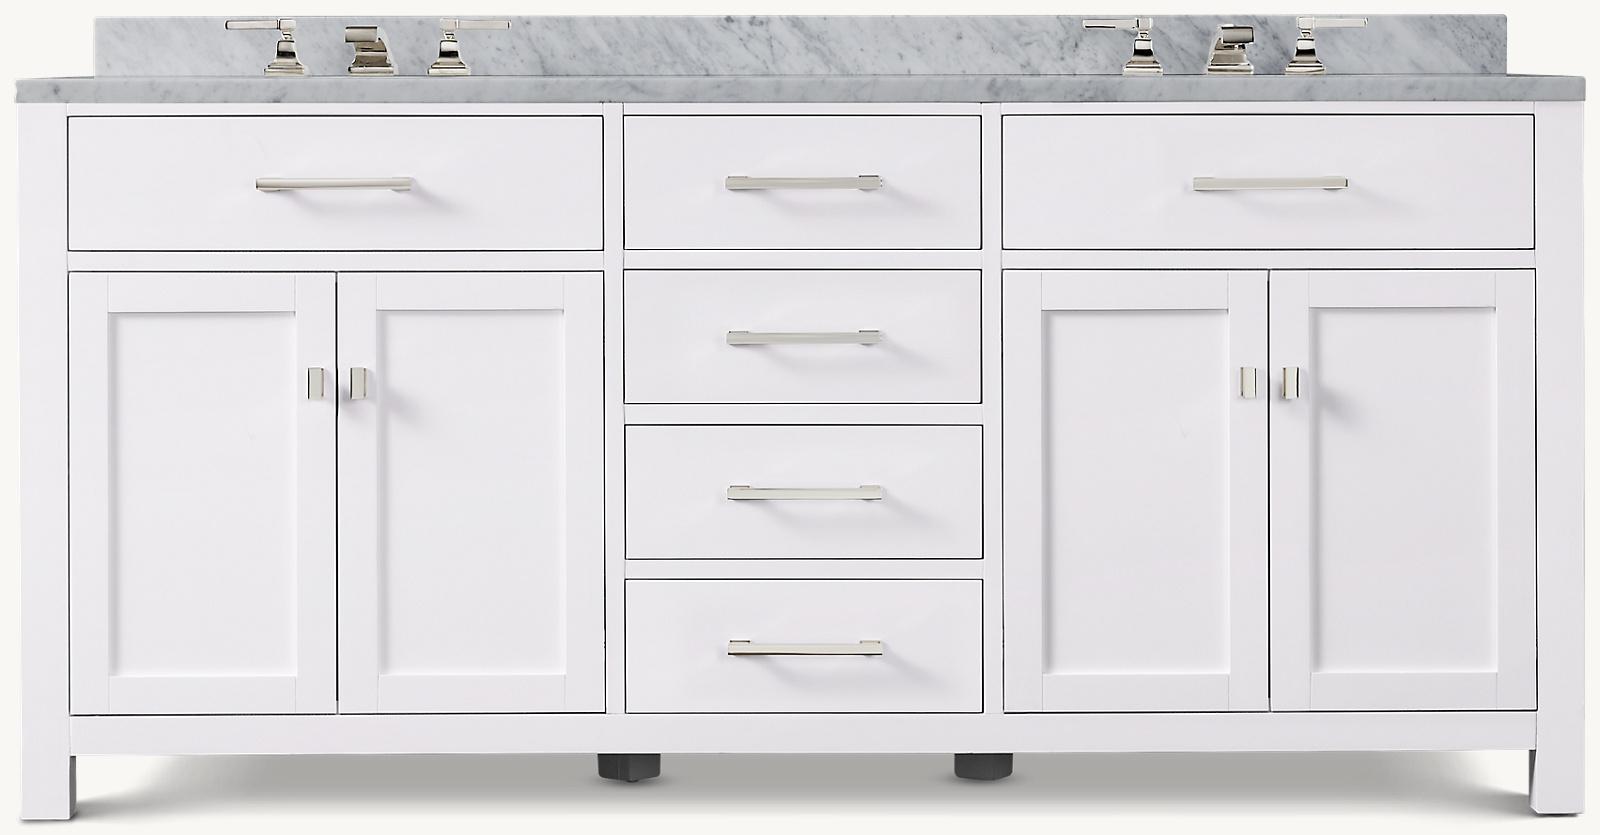 72&#34;W vanity shown in White and Polished Nickel with Italian Carrara Marble countertop. Featured with Dillon Lever-Handle 8&#34; Widespread Faucet.